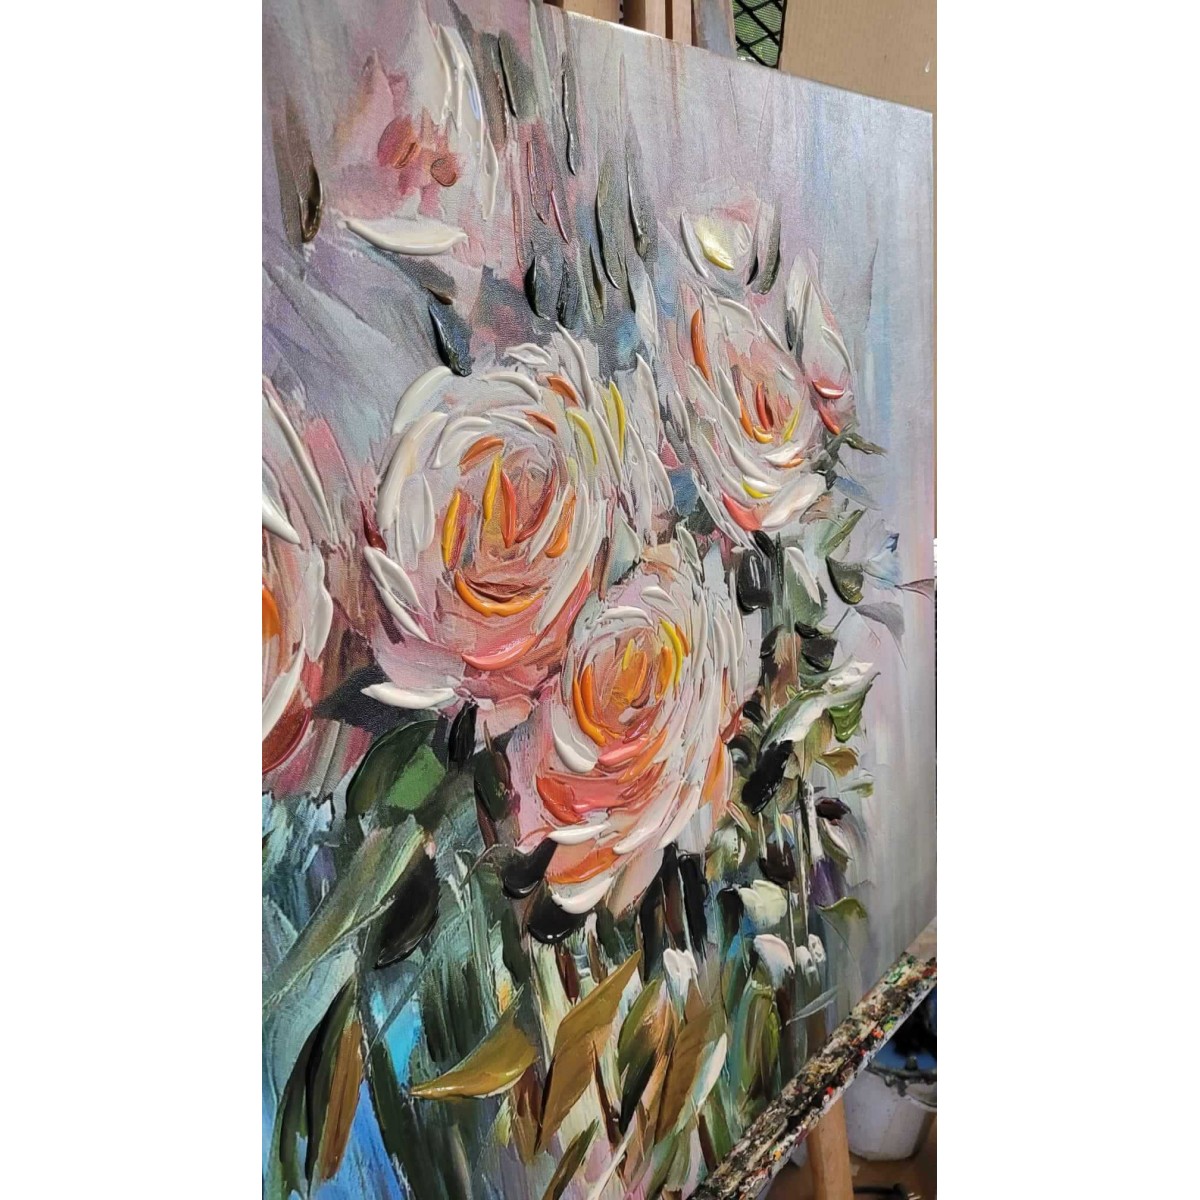 Bunch of Roses Textured Partial Oil Painting